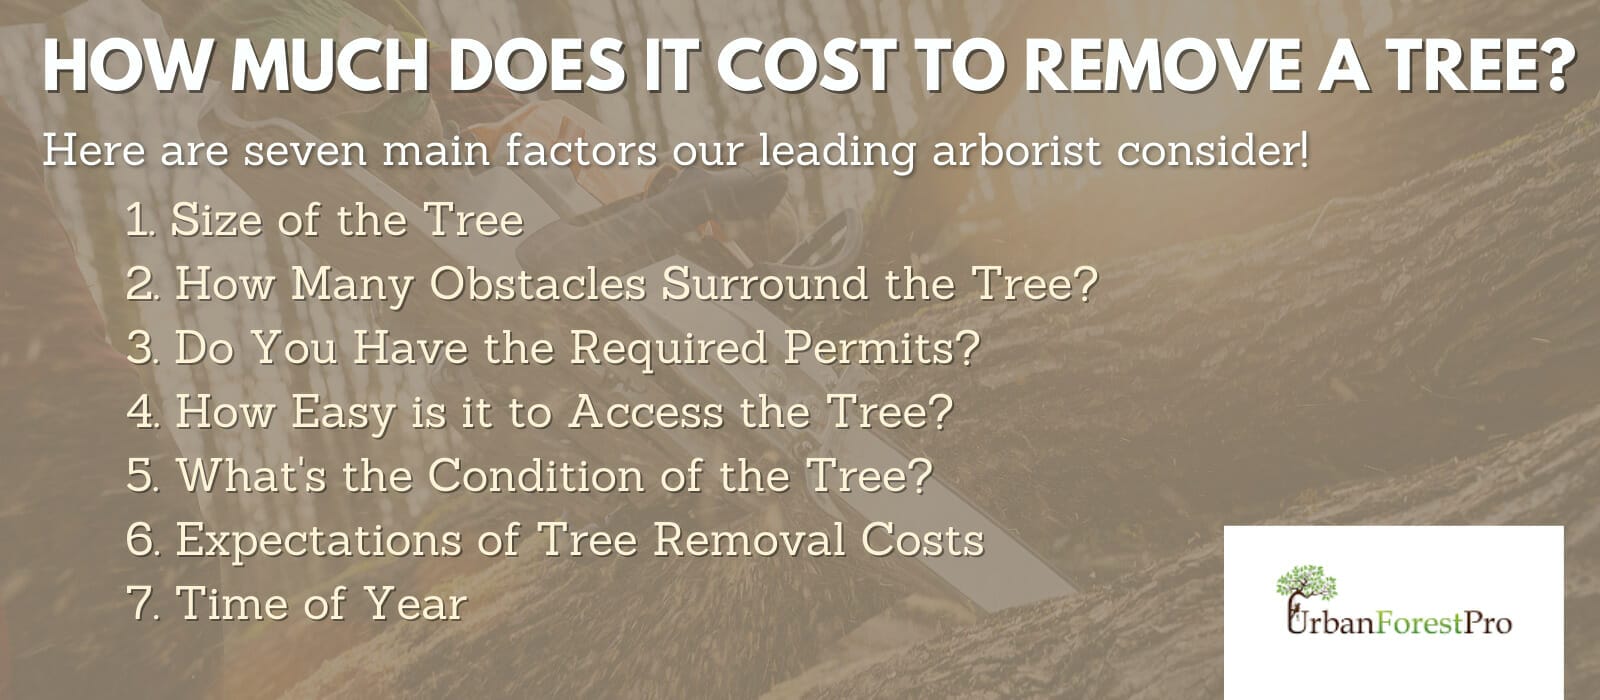 Urban Forest Pro Average Cost of Tree Removal Portland OR